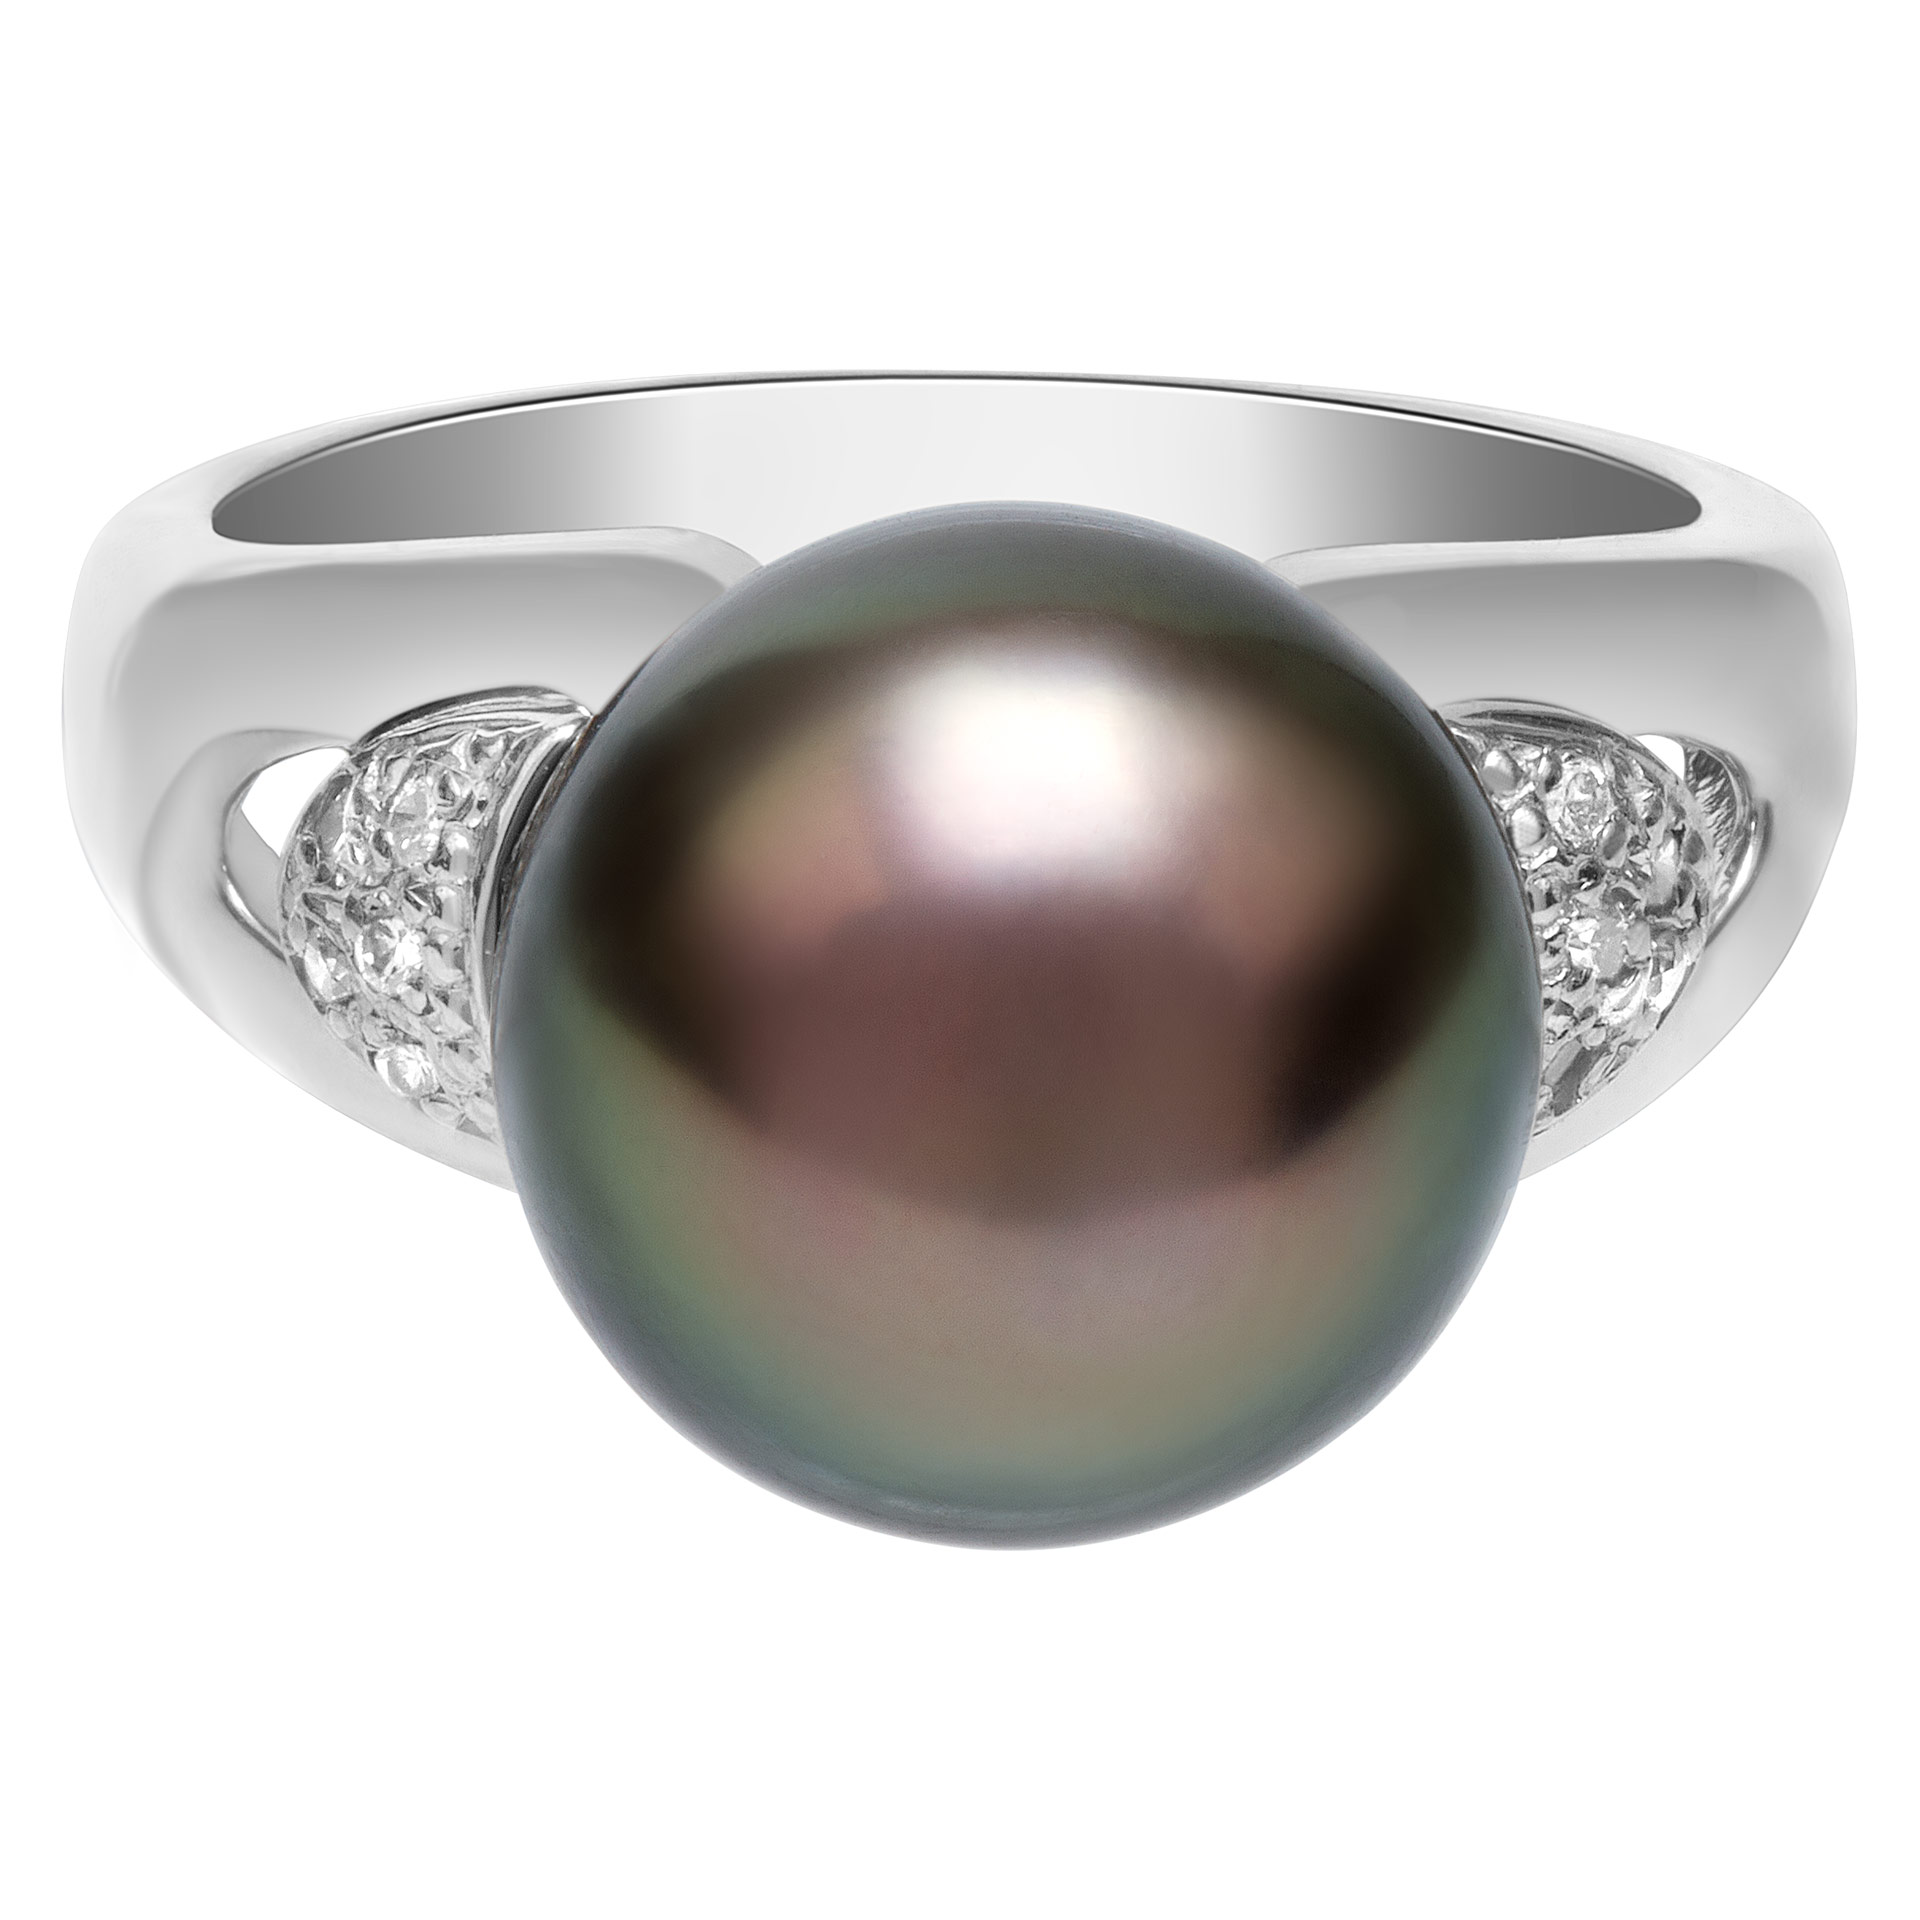 11.3mm black pearl ring in platinum with diamond accents. Size 5.75